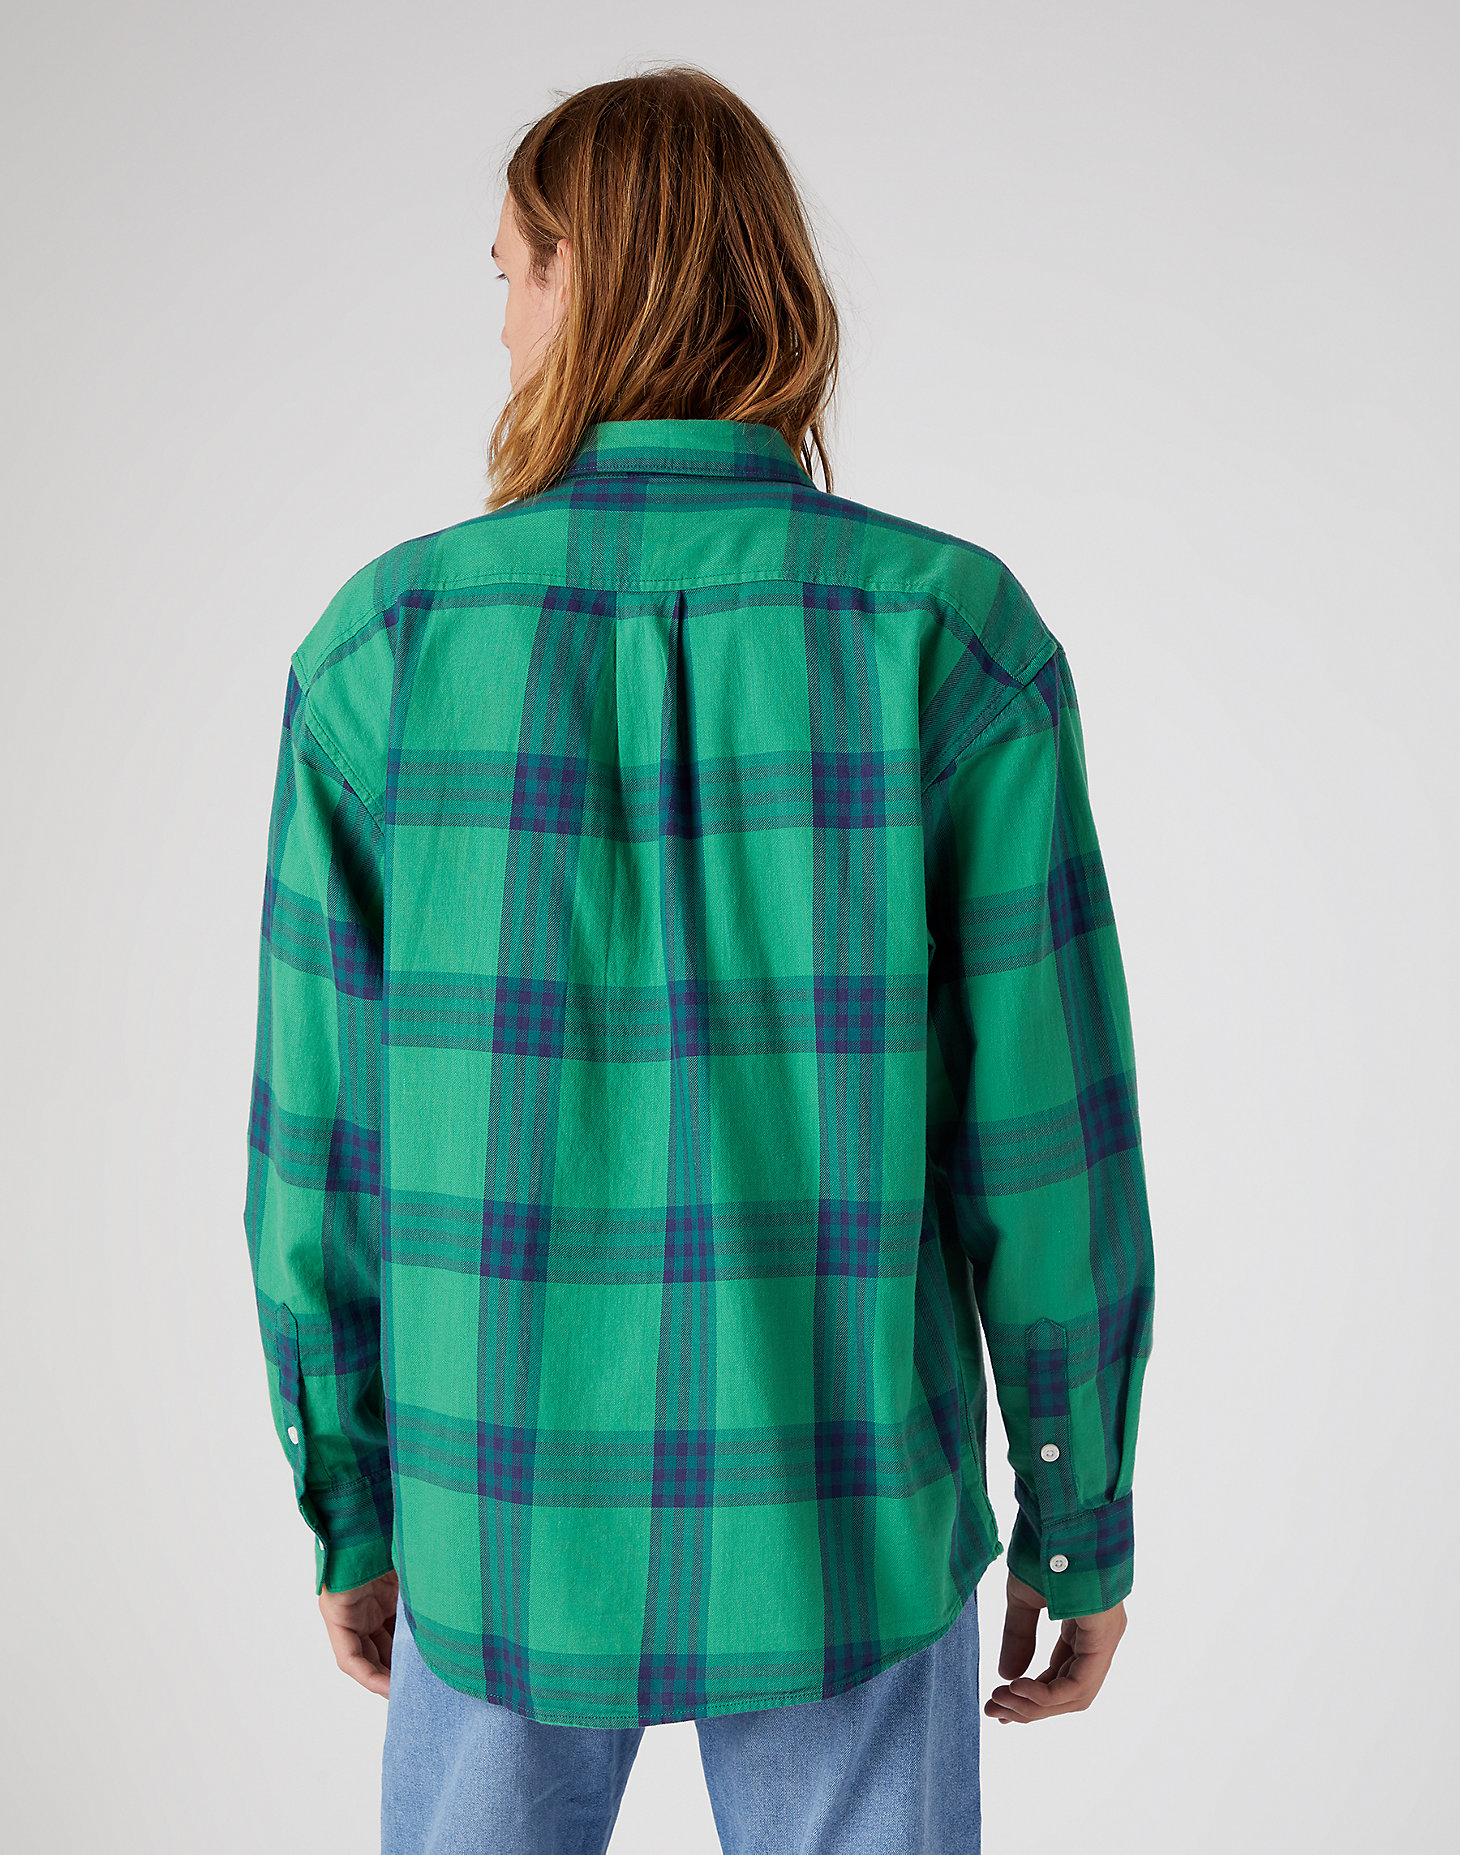 Patch Pocket Shirt in Pine Green alternative view 4